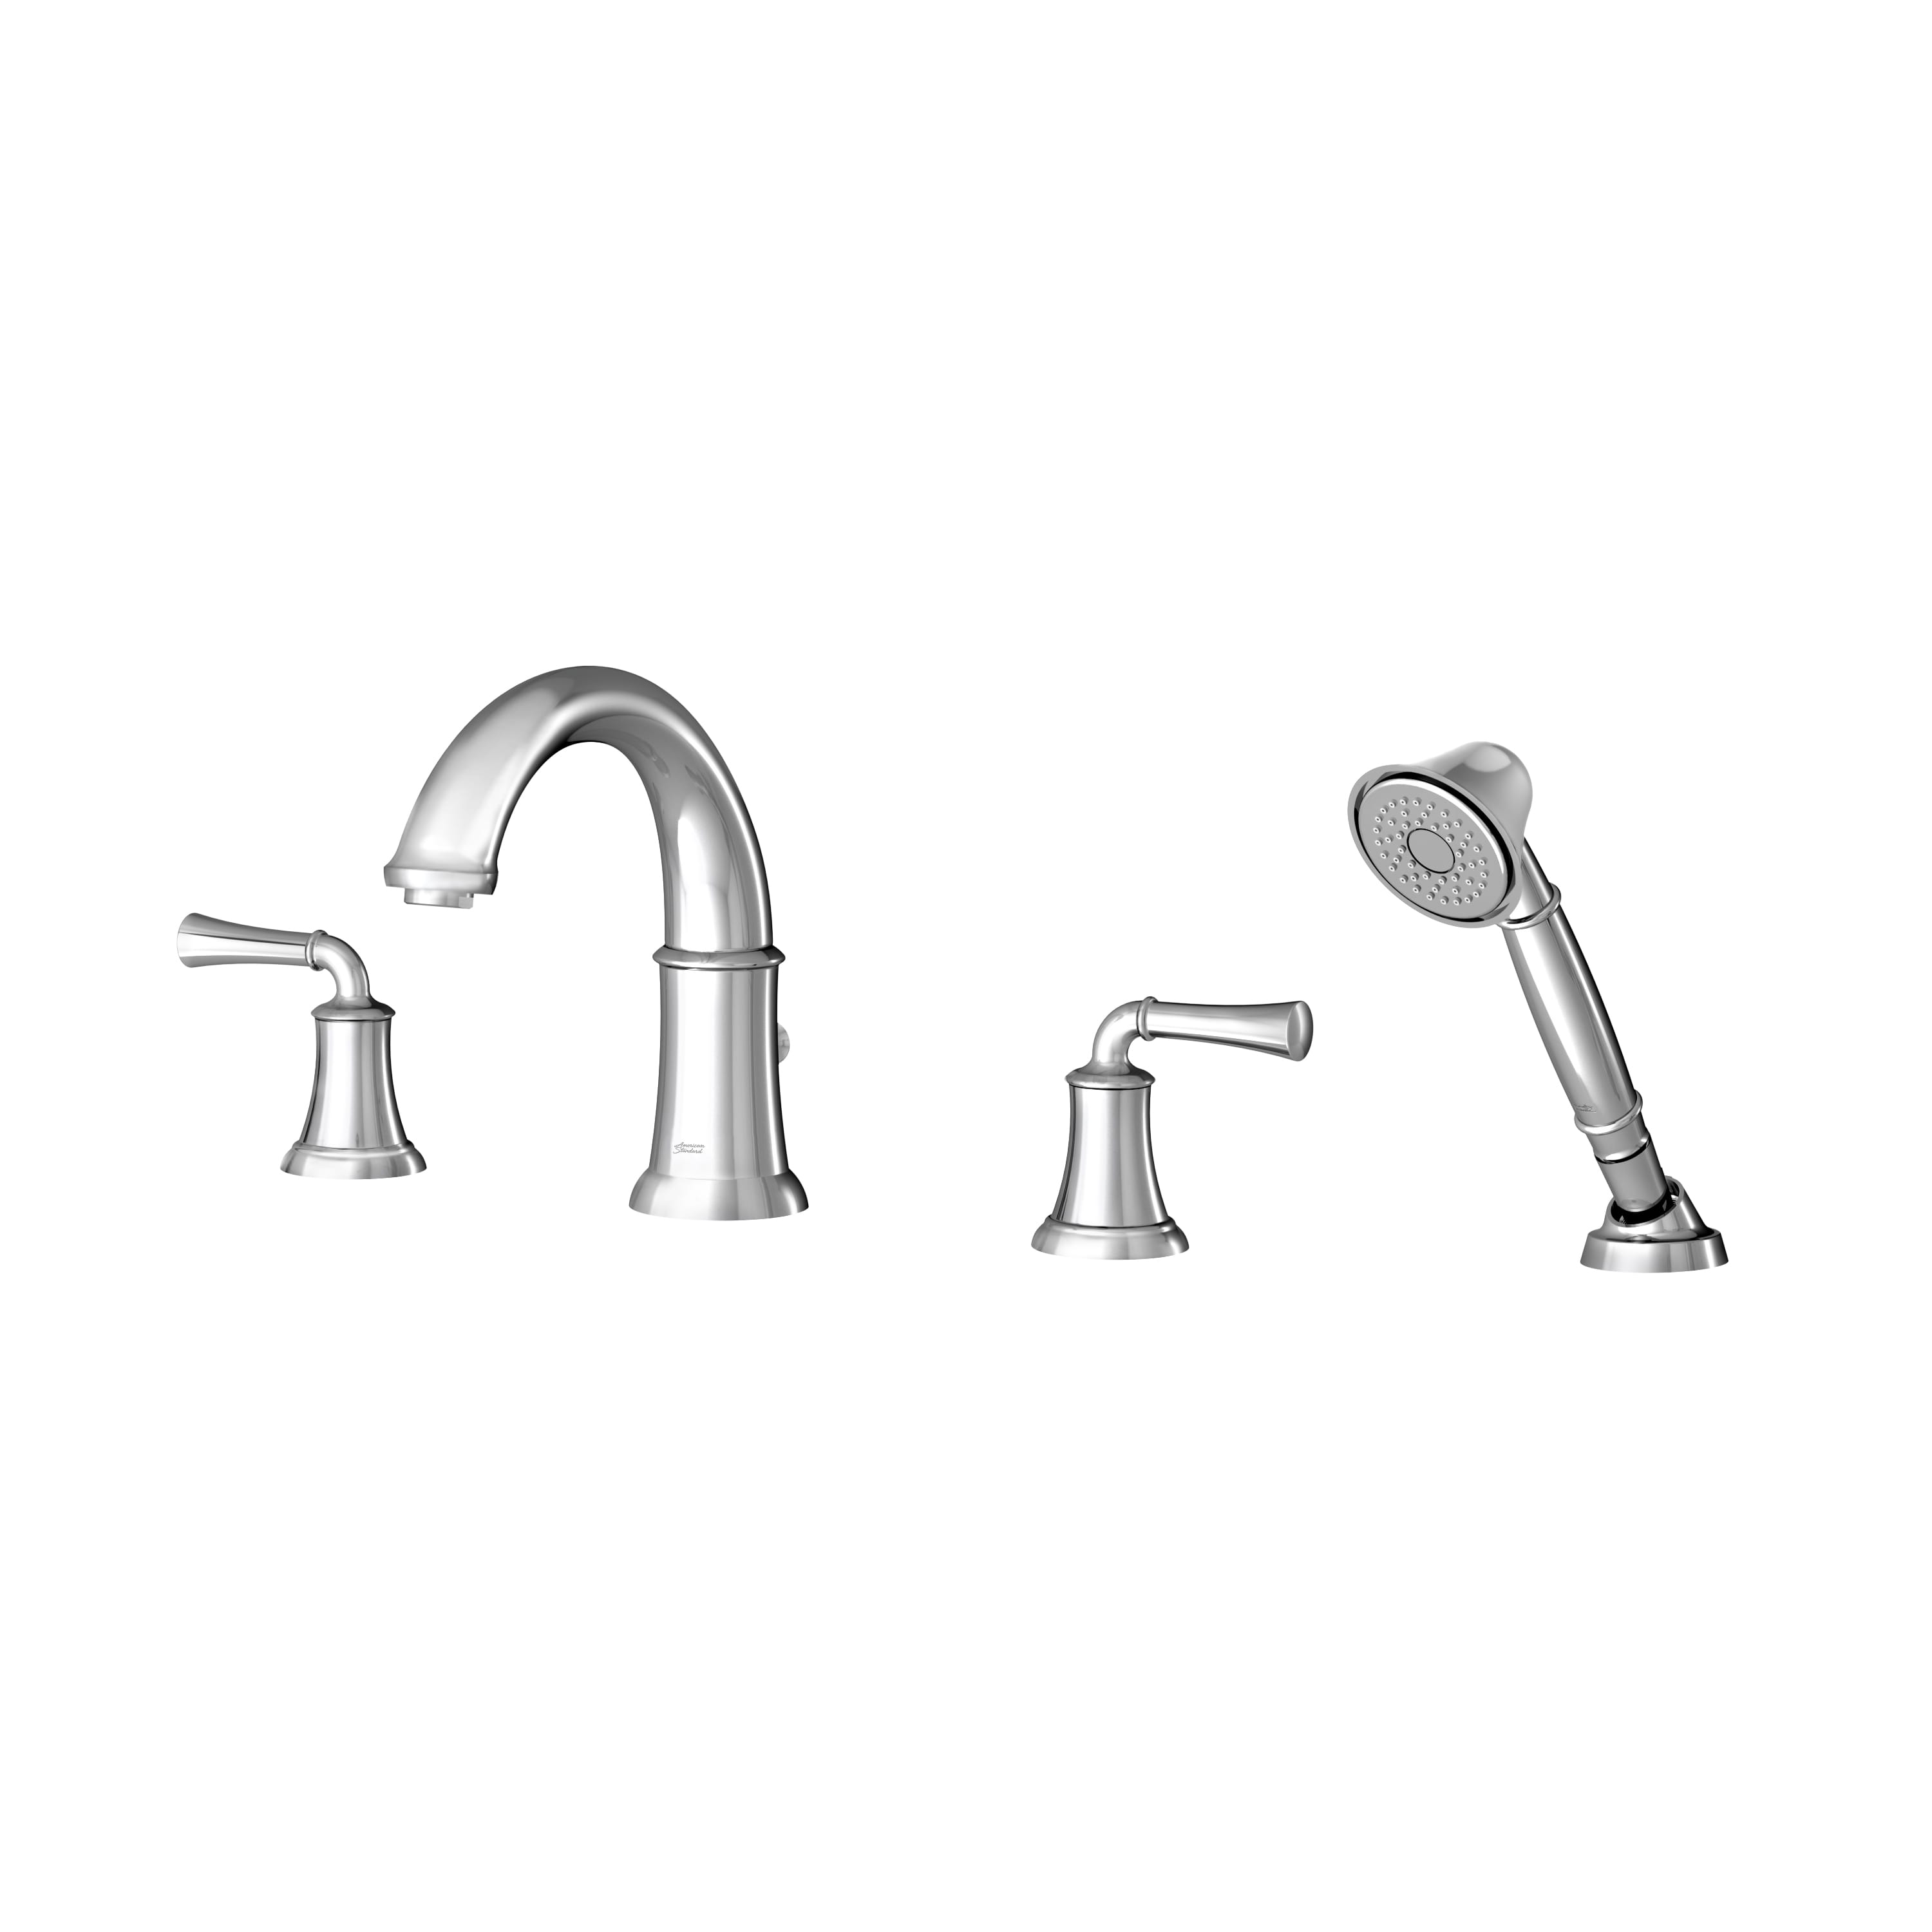 Portsmouth Bathtub Faucet with Personal Shower for Flash Rough in Valve with Lever Handles CHROME